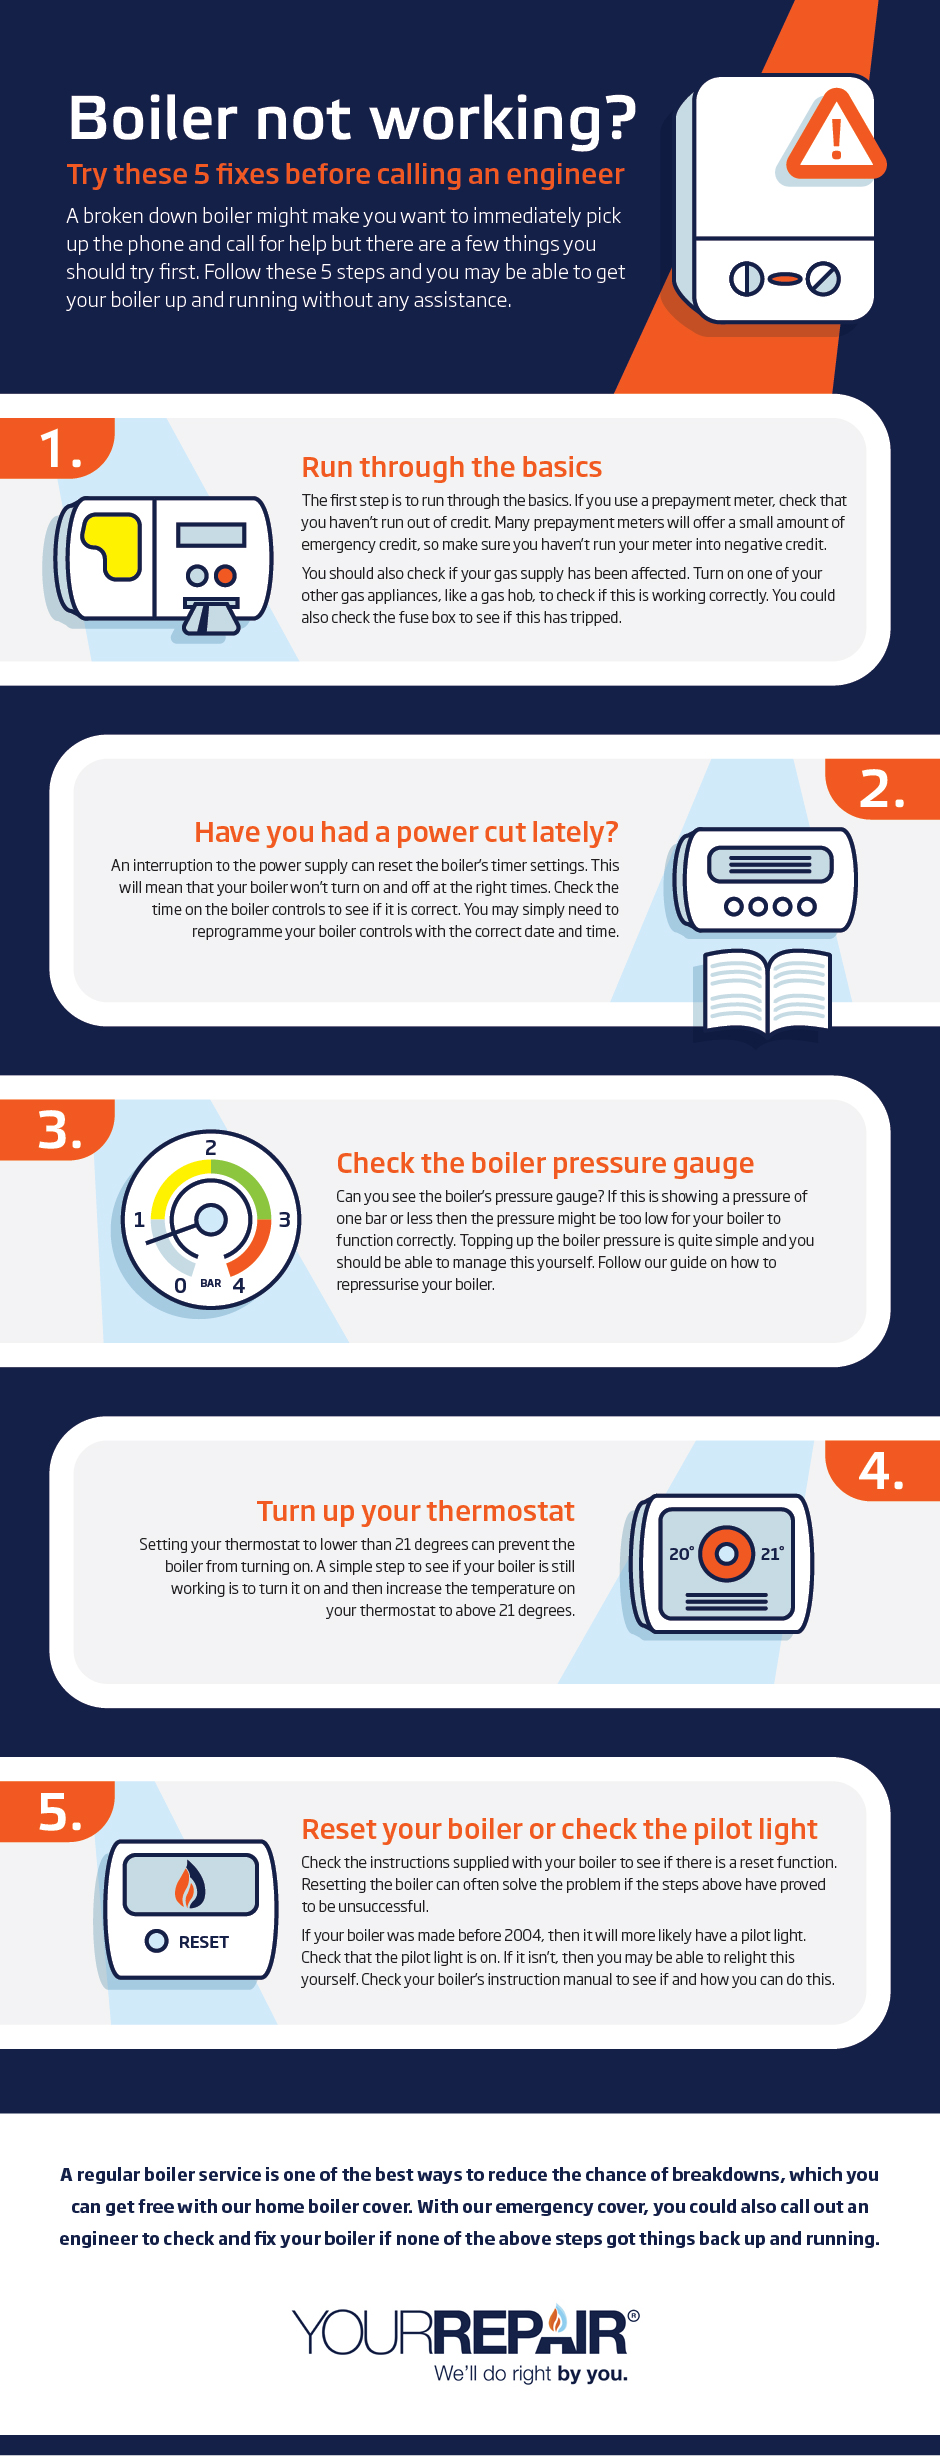 Boiler not working? Try these 5 fixes before calling an engineer - Infographic